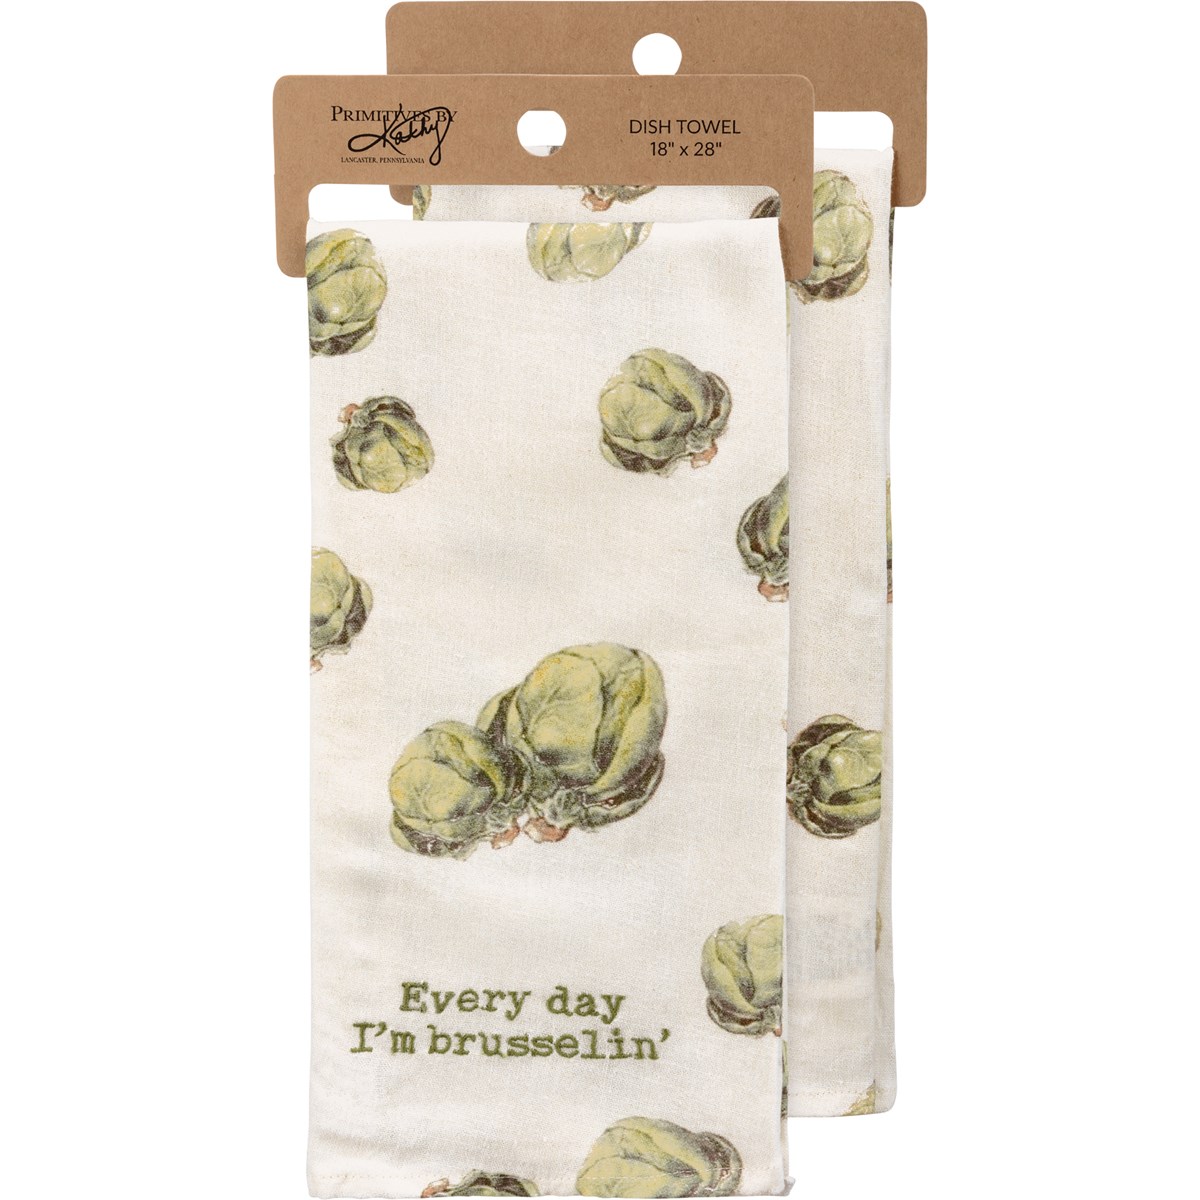 Every Day I'm Brusselin' Kitchen Towel - Cotton, Linen